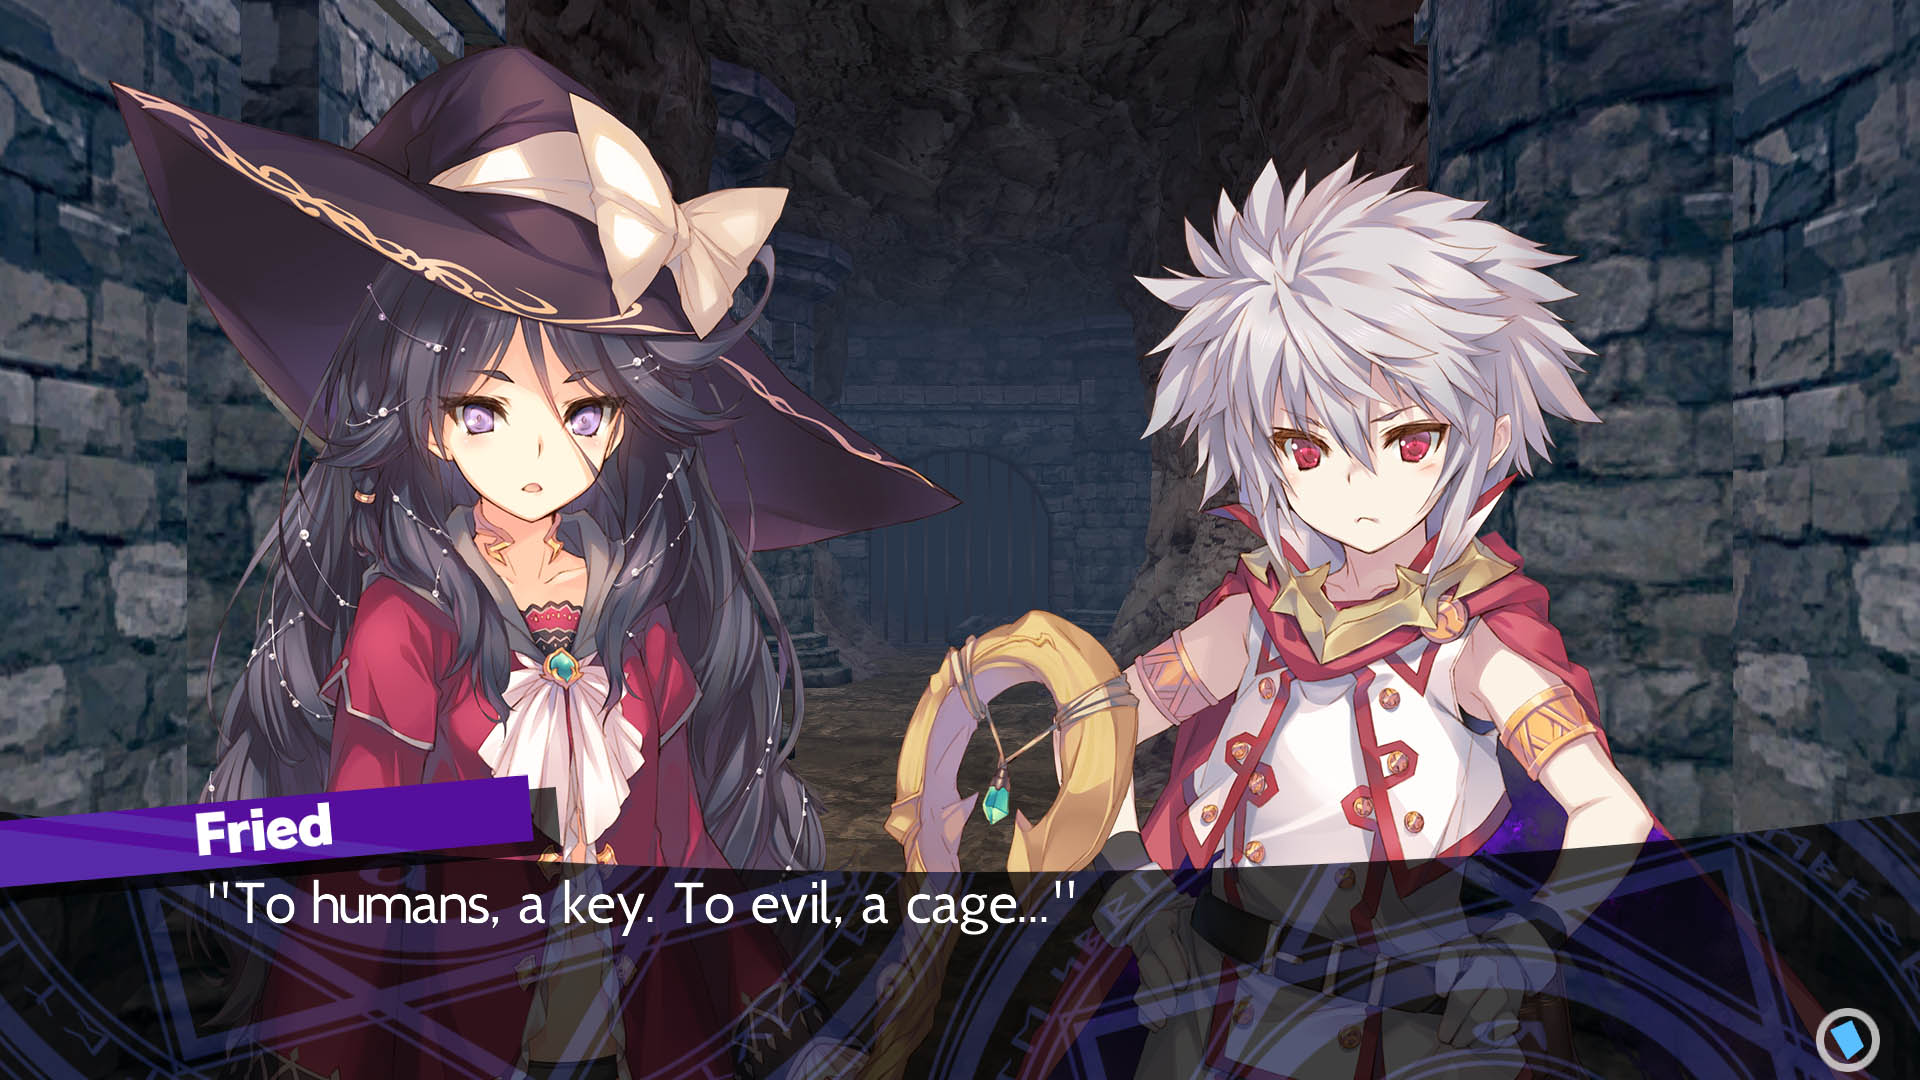 Dungeon Travelers 2-2: The Fallen Maidens & the Book of Beginnings (English) - RPG - 3 - Select